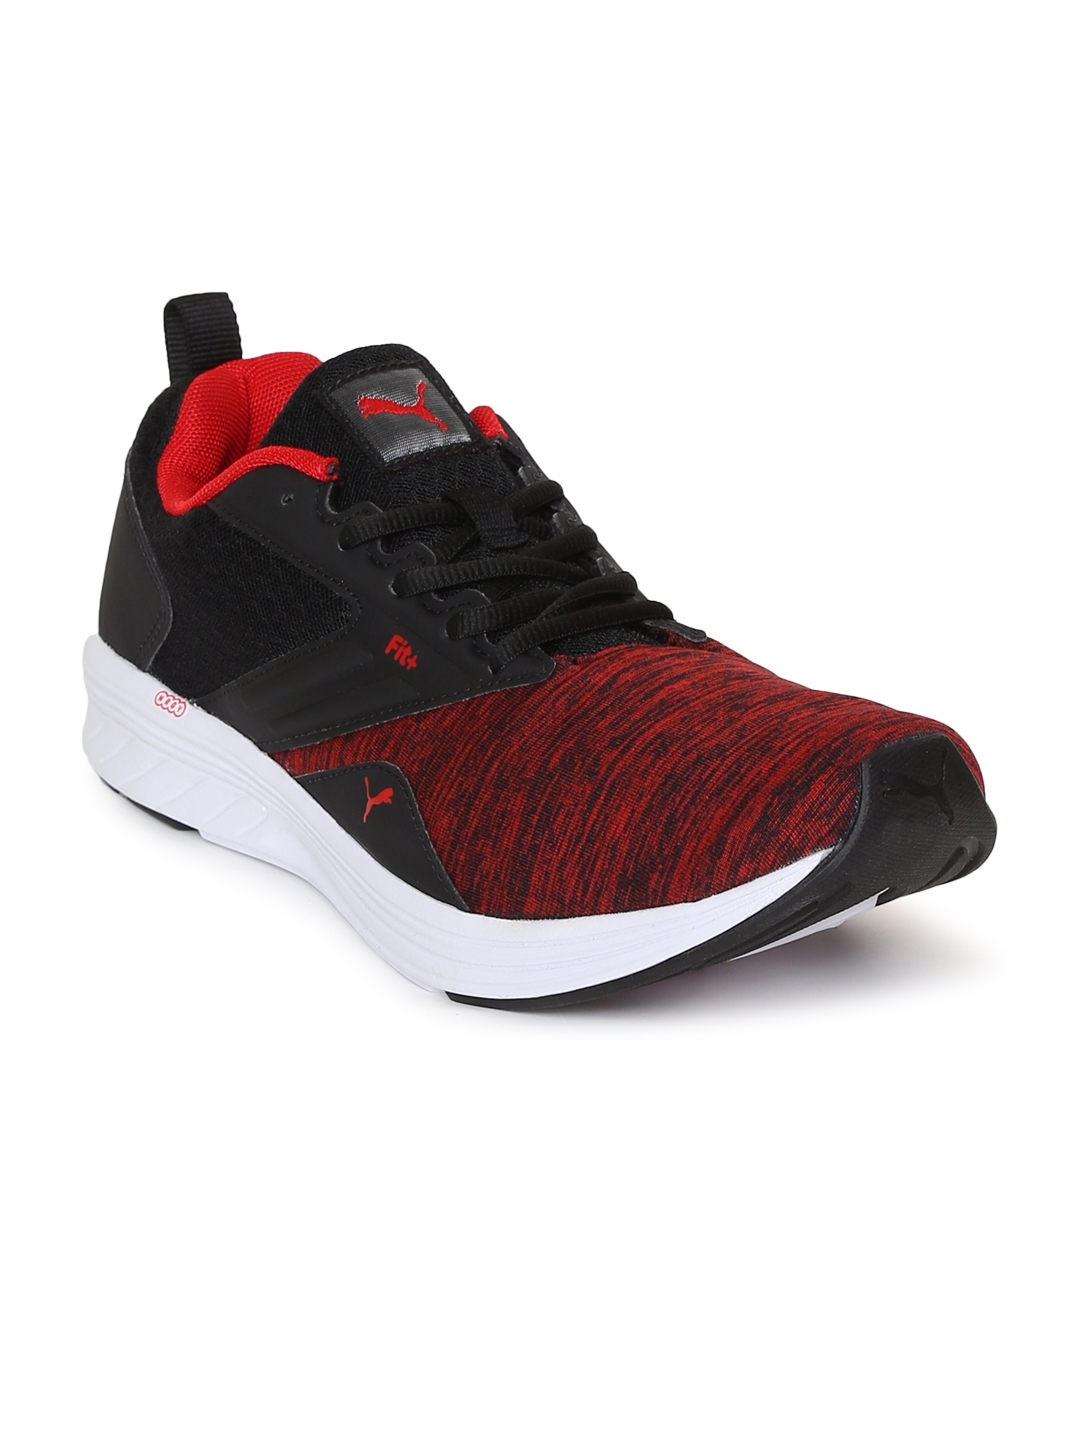 puma comet ipd running shoes for men